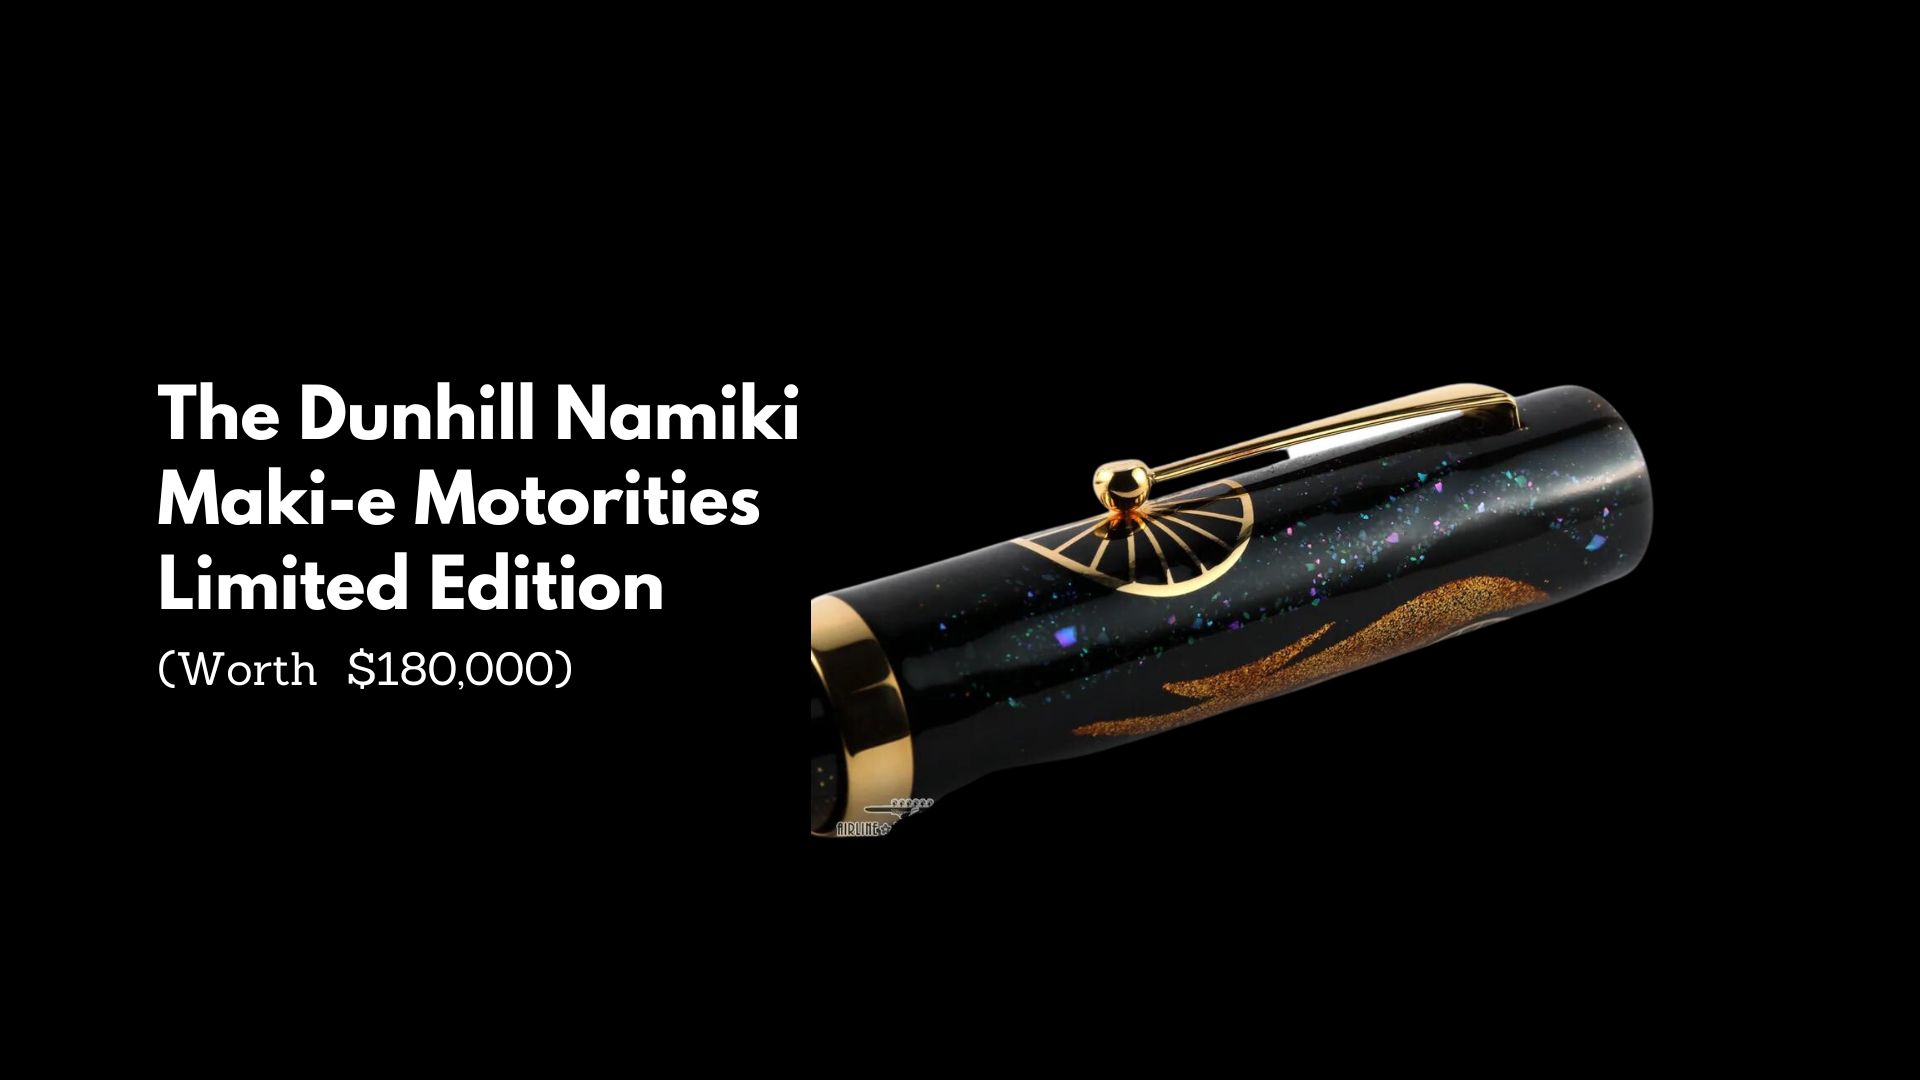 The Dunhill Namiki Maki-e Motorities Limited Edition - (Worth $180,000)